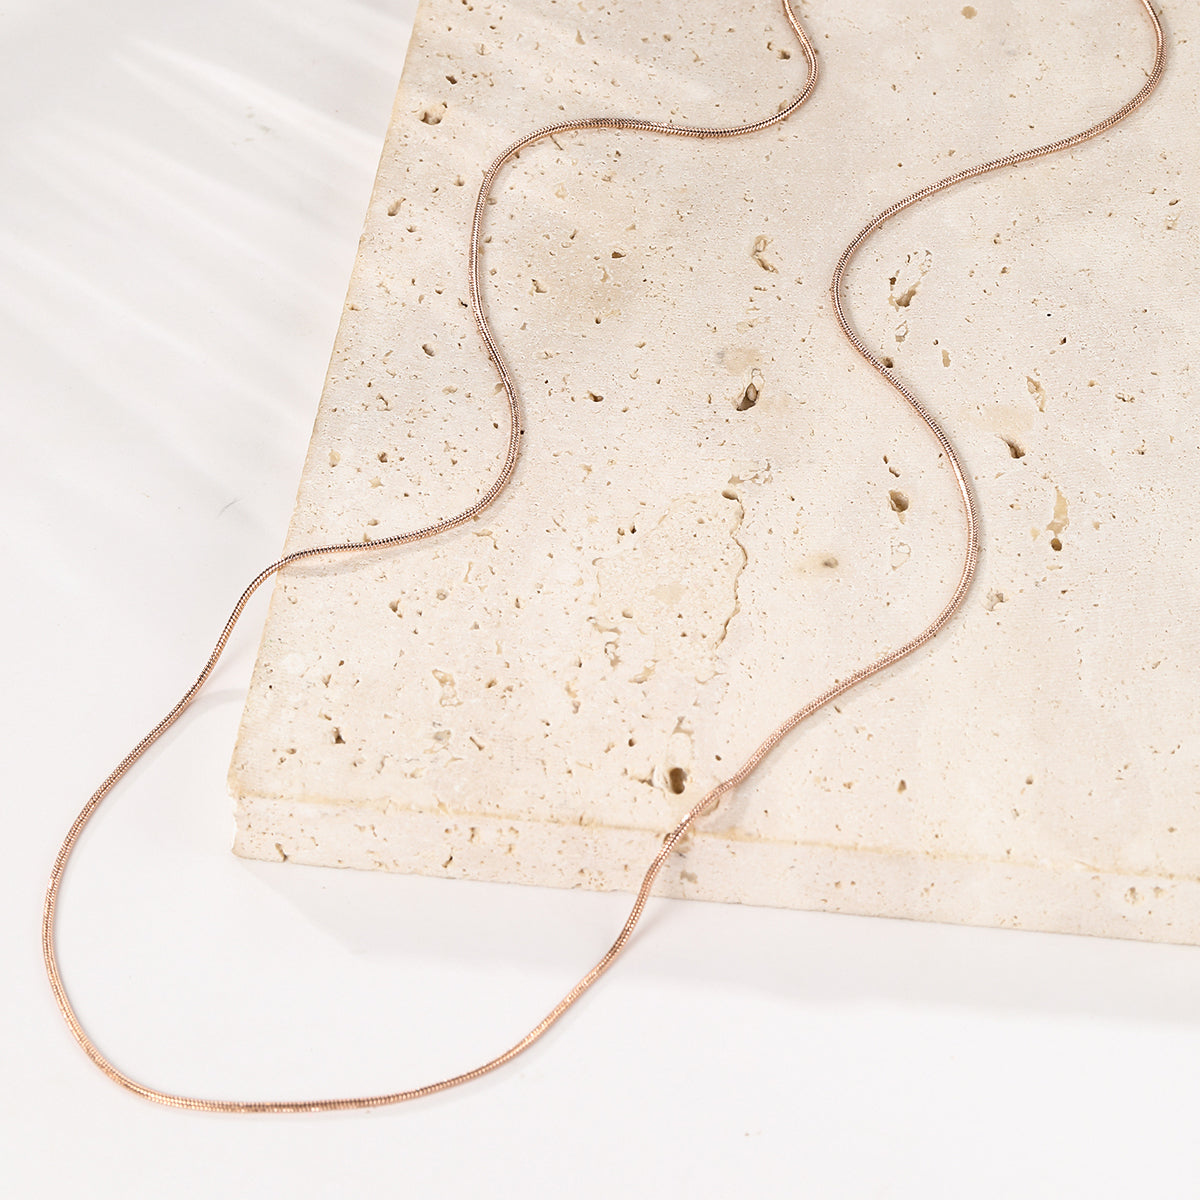 Unisex Rolled Snake Chain Necklace Gold